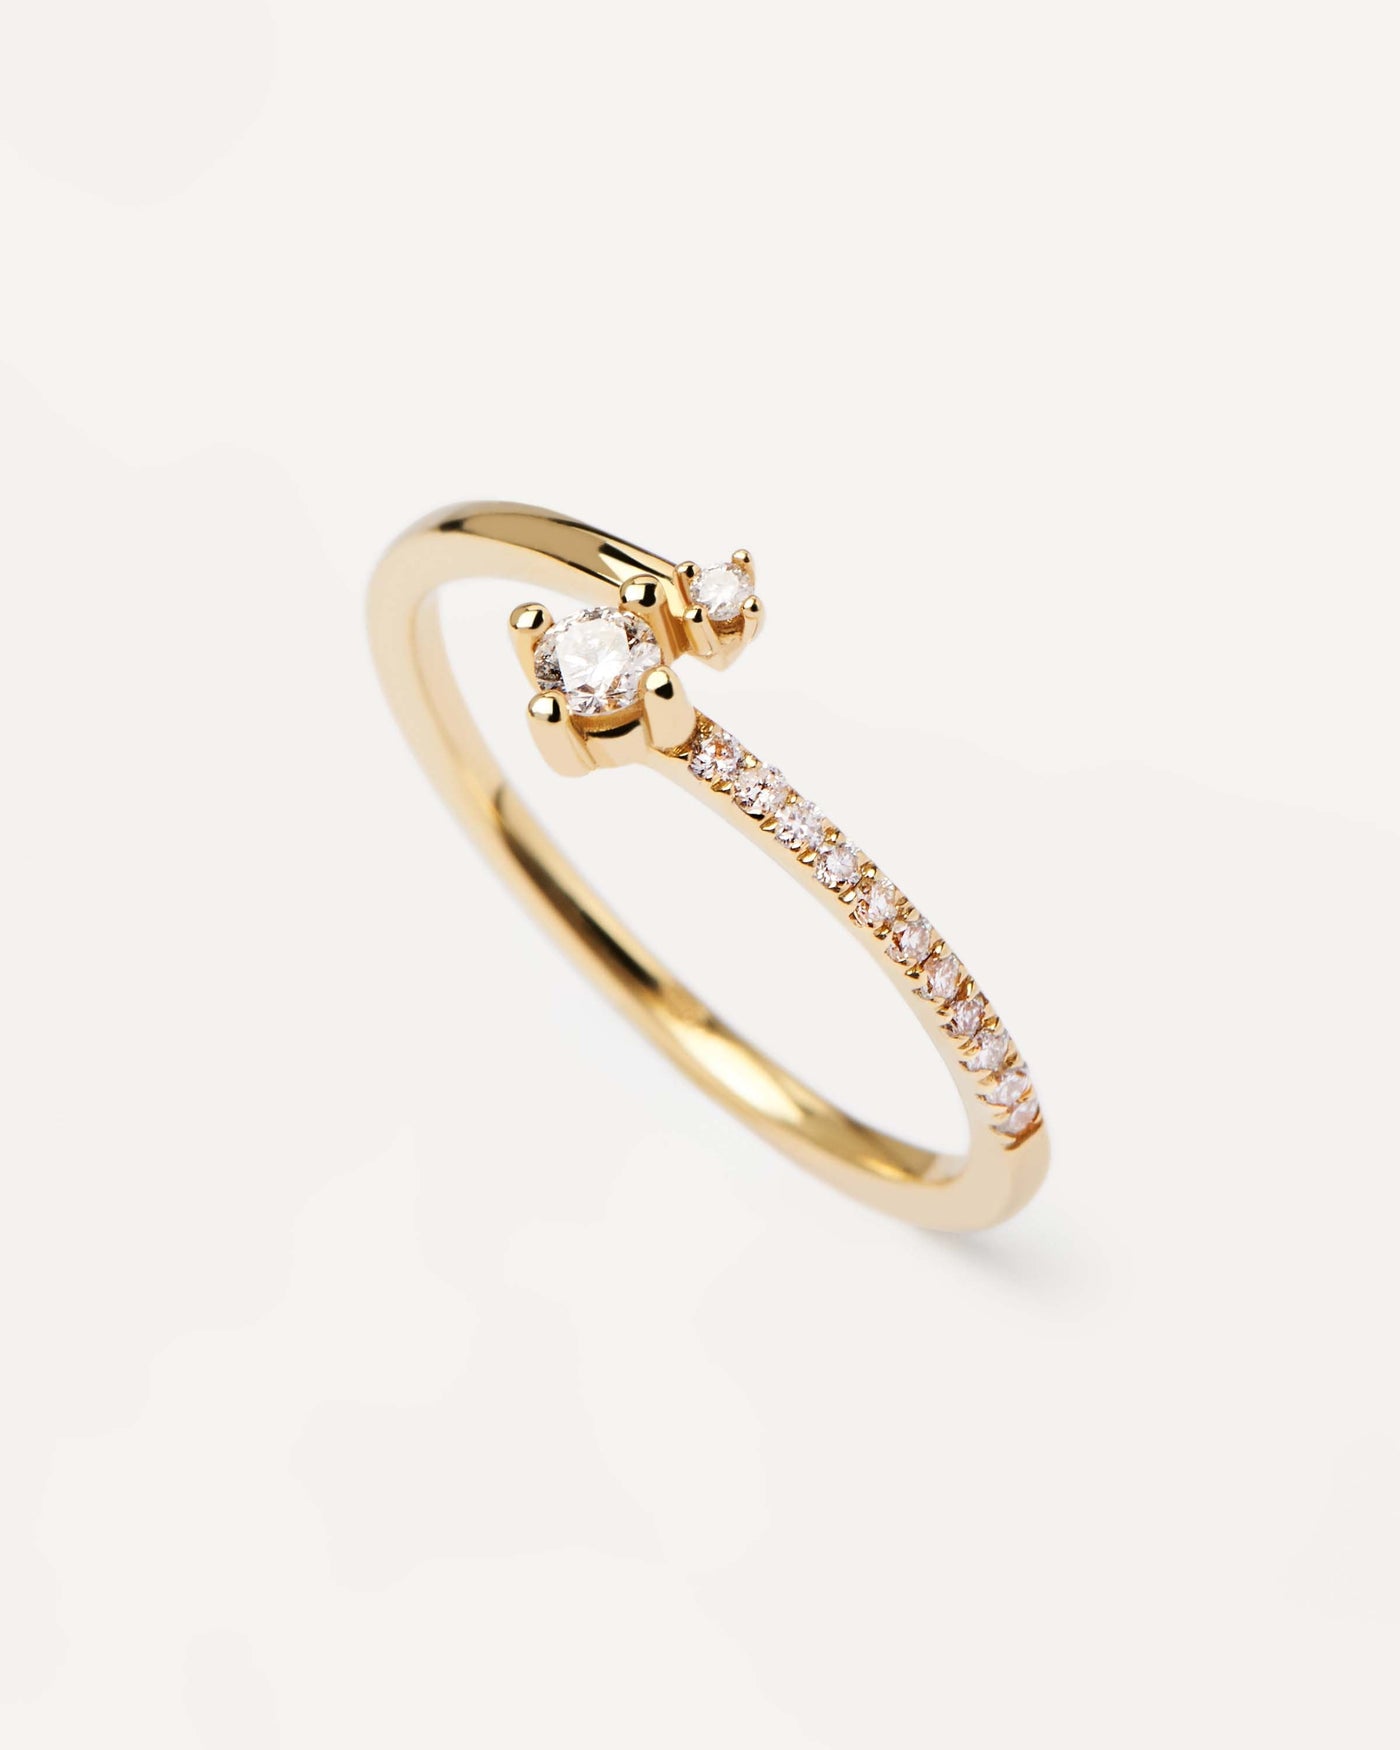 Buy 18K Recycled Gold and Lab-grown diamonds ring. High-end materials with a lifetime personal assistance. Free Shipping.